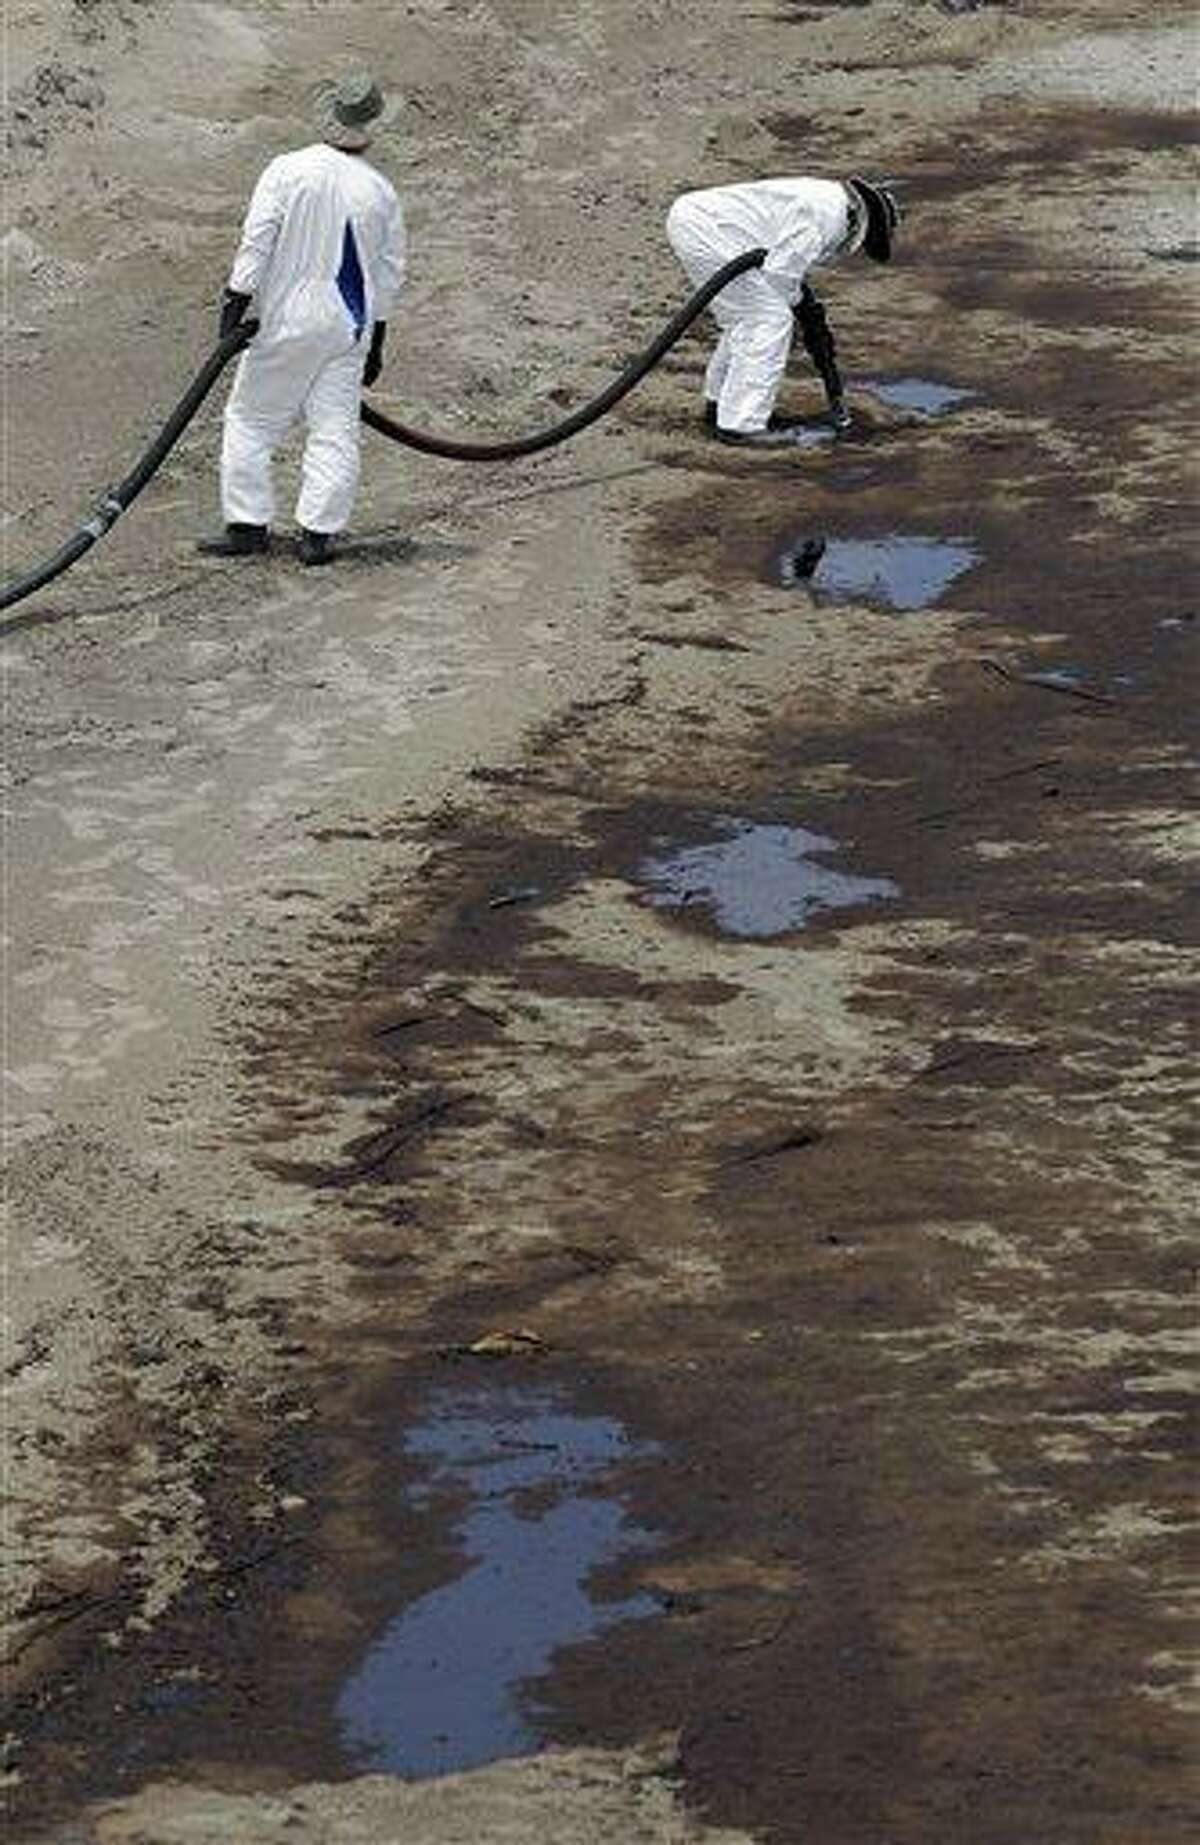 A worker uses a suction hose to remove oil that has washed ashore from the Deepwater Horizon spill, Sunday, June 6, 2010 in Grand Isle, La.. (AP Photo/Eric Gay)